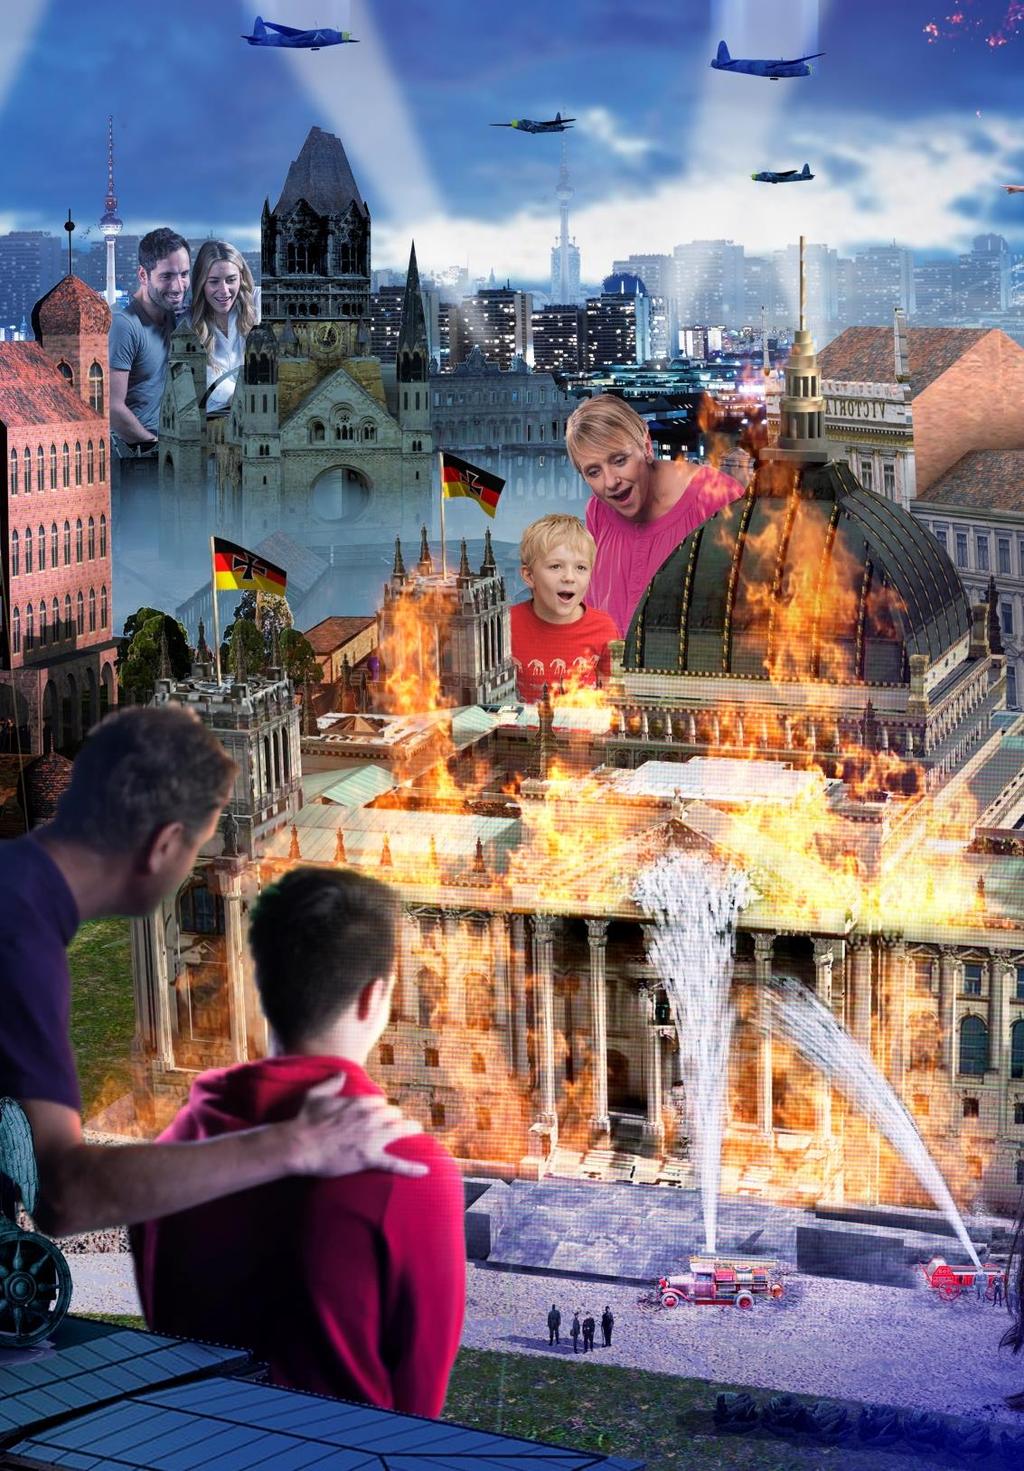 from medieval to modern Berlin using a captivating combination of special effects, storytelling and